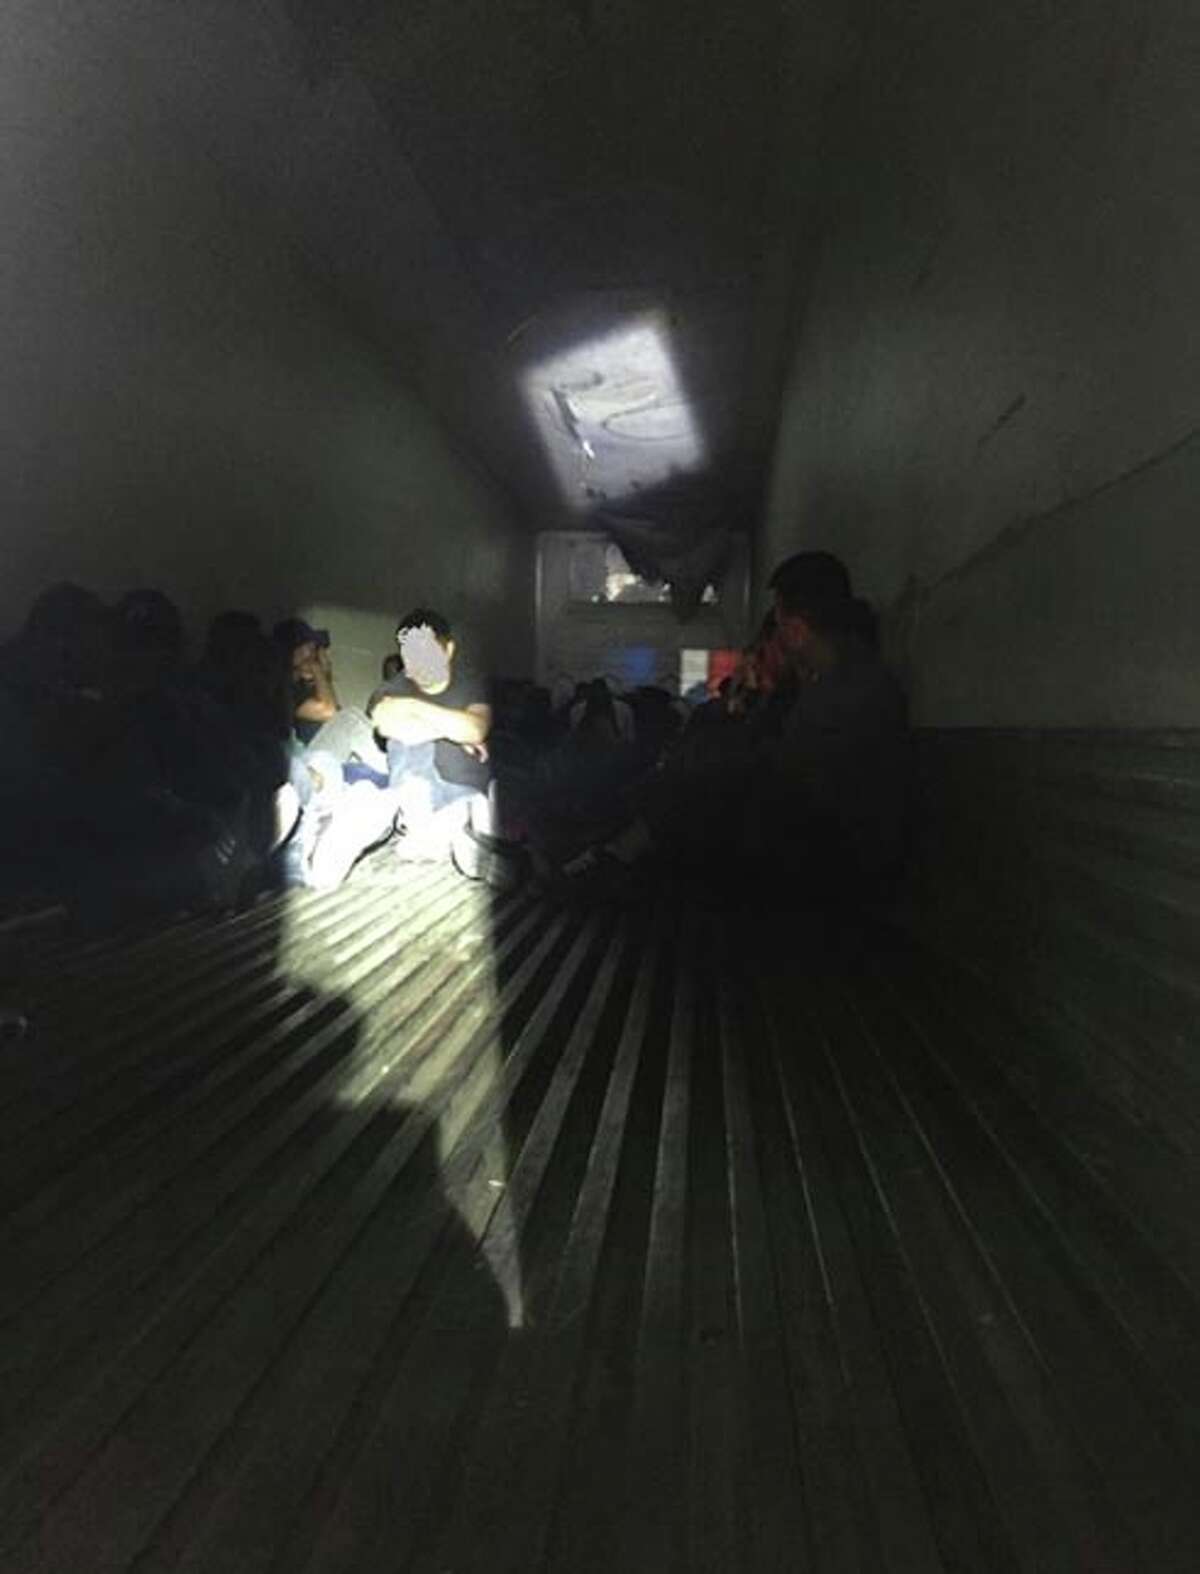 Border Patrol agents discovered 78 undocumented immigrants inside the locked refrigerated trailer.